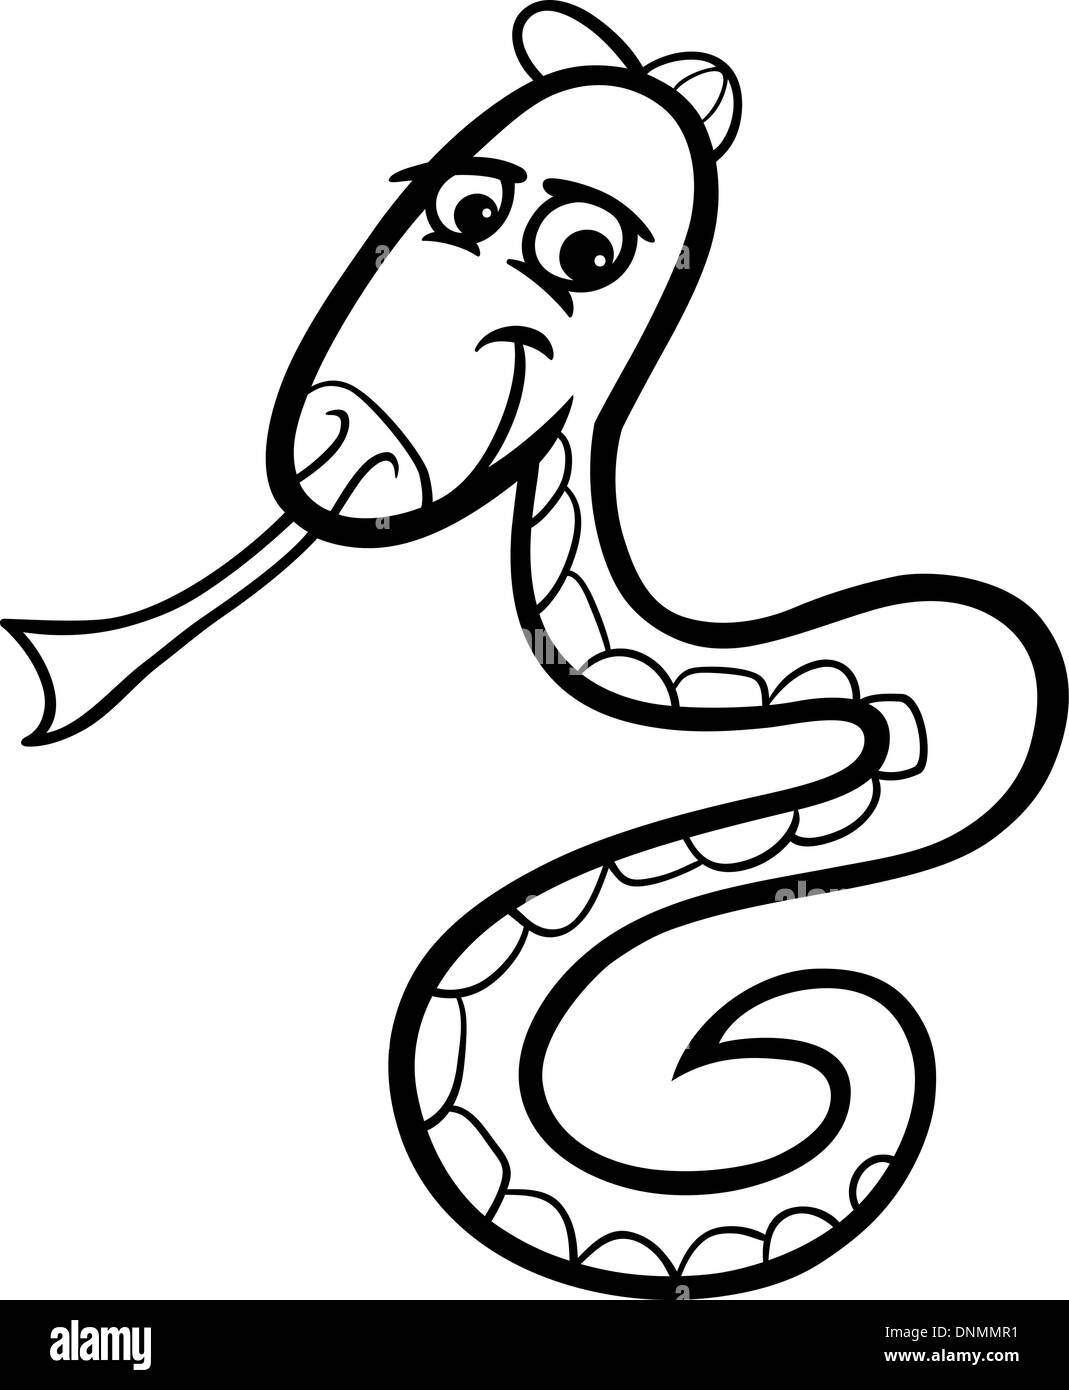 Funny cartoon snake Black and White Stock Photos & Images - Alamy